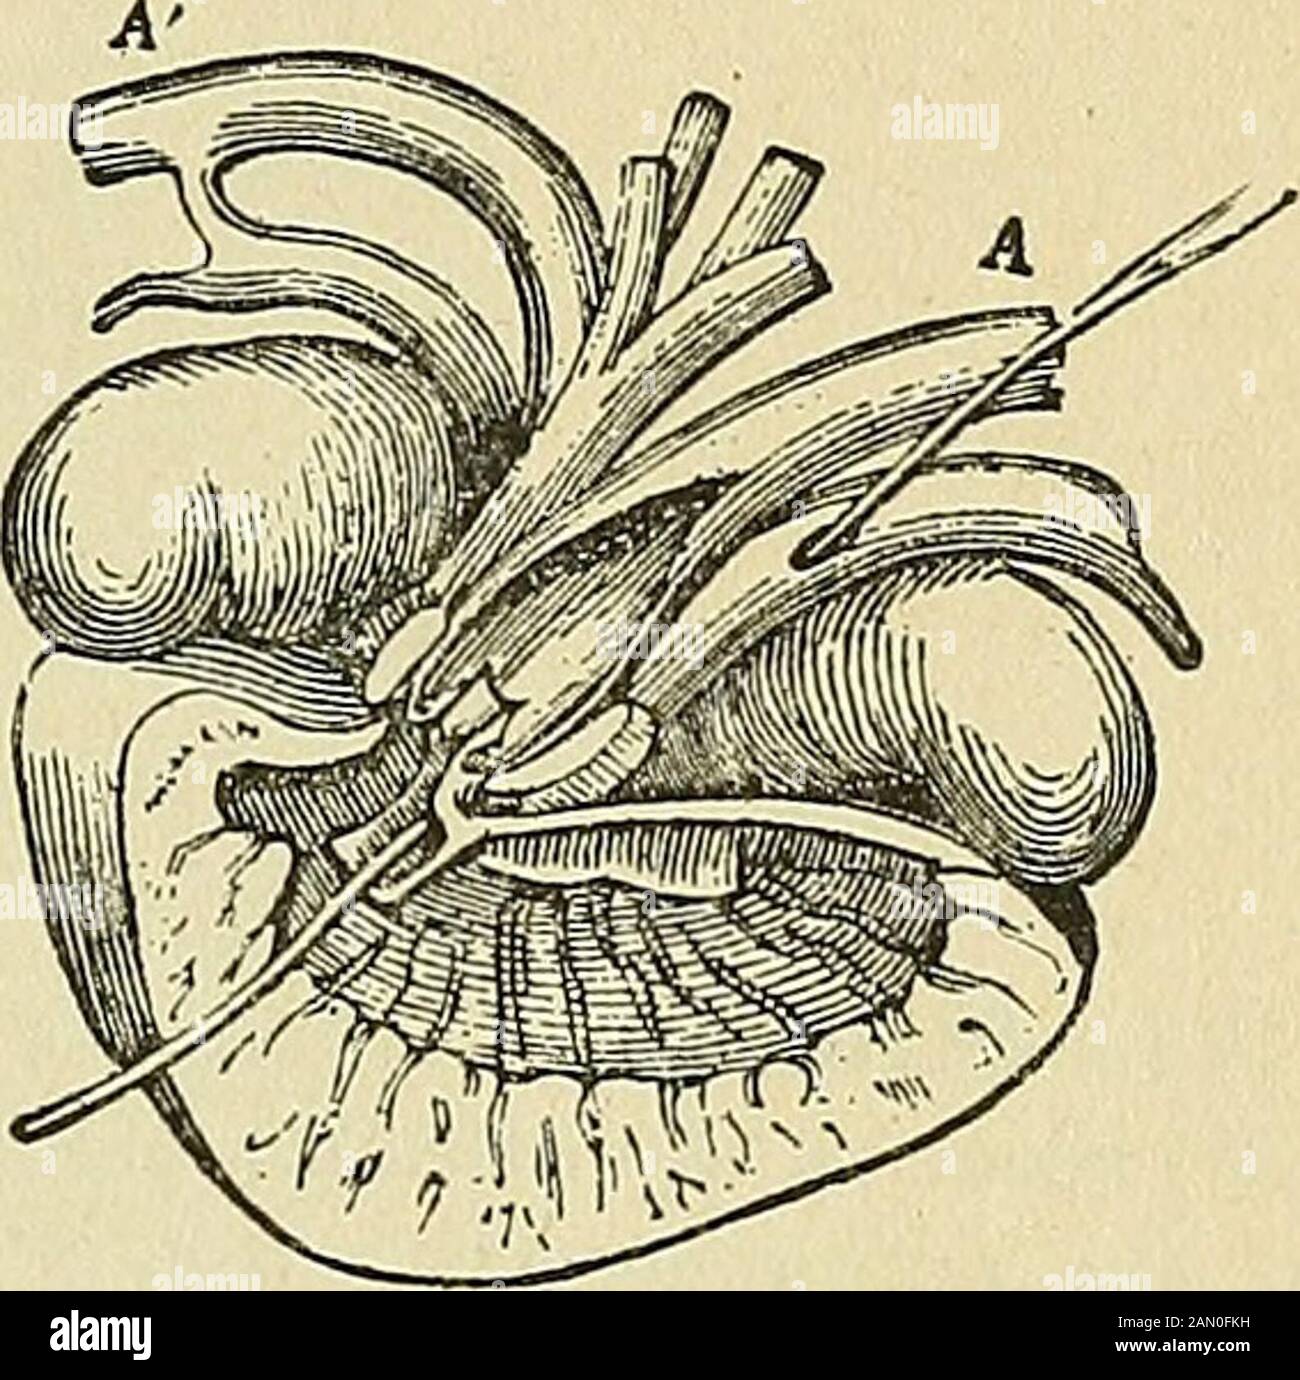 The laws and mechanics of circulation, with the principle involved in animal movement . Heart of Tortoise (Chelys fimbriate).—Owen. Showing interior of ventricle, the incom-plete interventricular septum dividing the aortic from the pulmonic cavities, throughwhich the bristle is passed in the two sections. Fig. 176.—P, pulmonary artery laid open at the root, so as to expose the bivalved orifice,the bristle passed through the incomplete septum. Fig. 177. —A, right aorta ; A, left aorta, similarly exposed, and the incomplete septumcut through, the bristle passed through the pulmonary vein of that Stock Photo